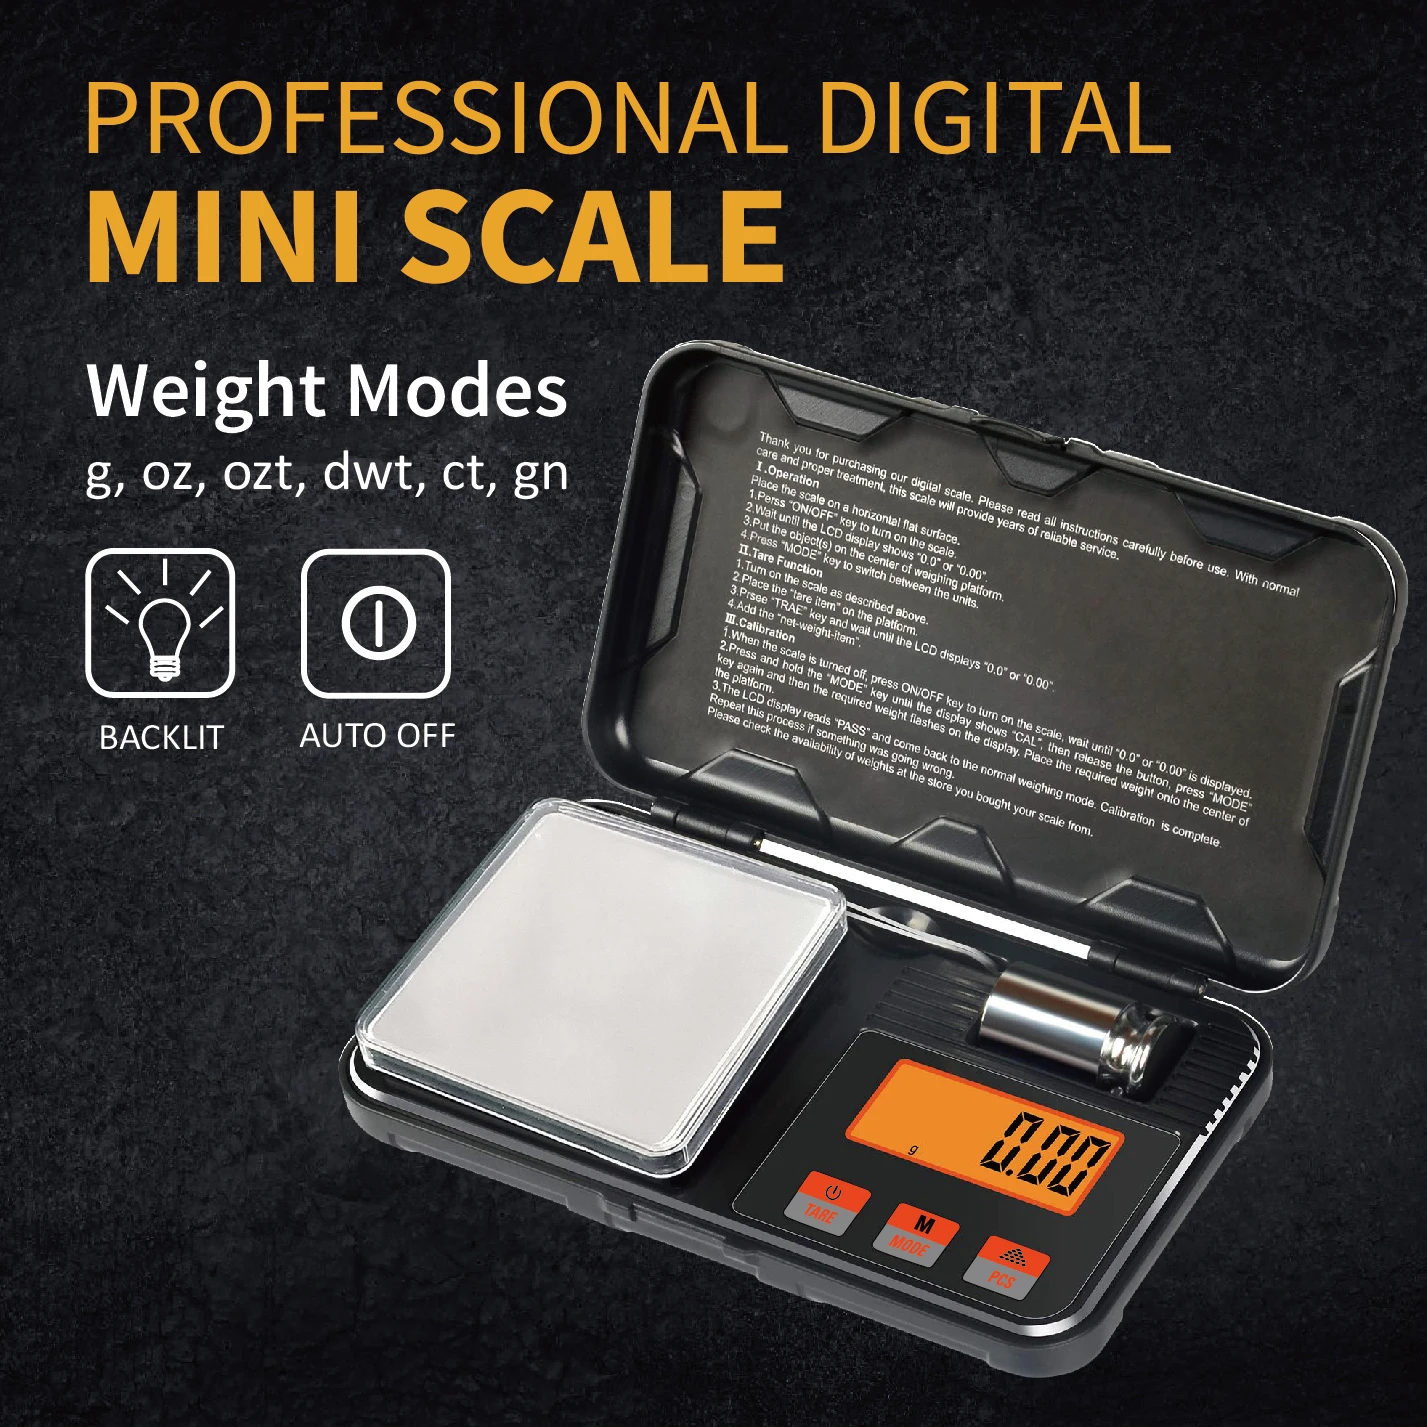 Mini Digital Jewelry Gold Scale Portable Pocket Balance Electronic Scales Kitchen Scale With High Precision 0.01g